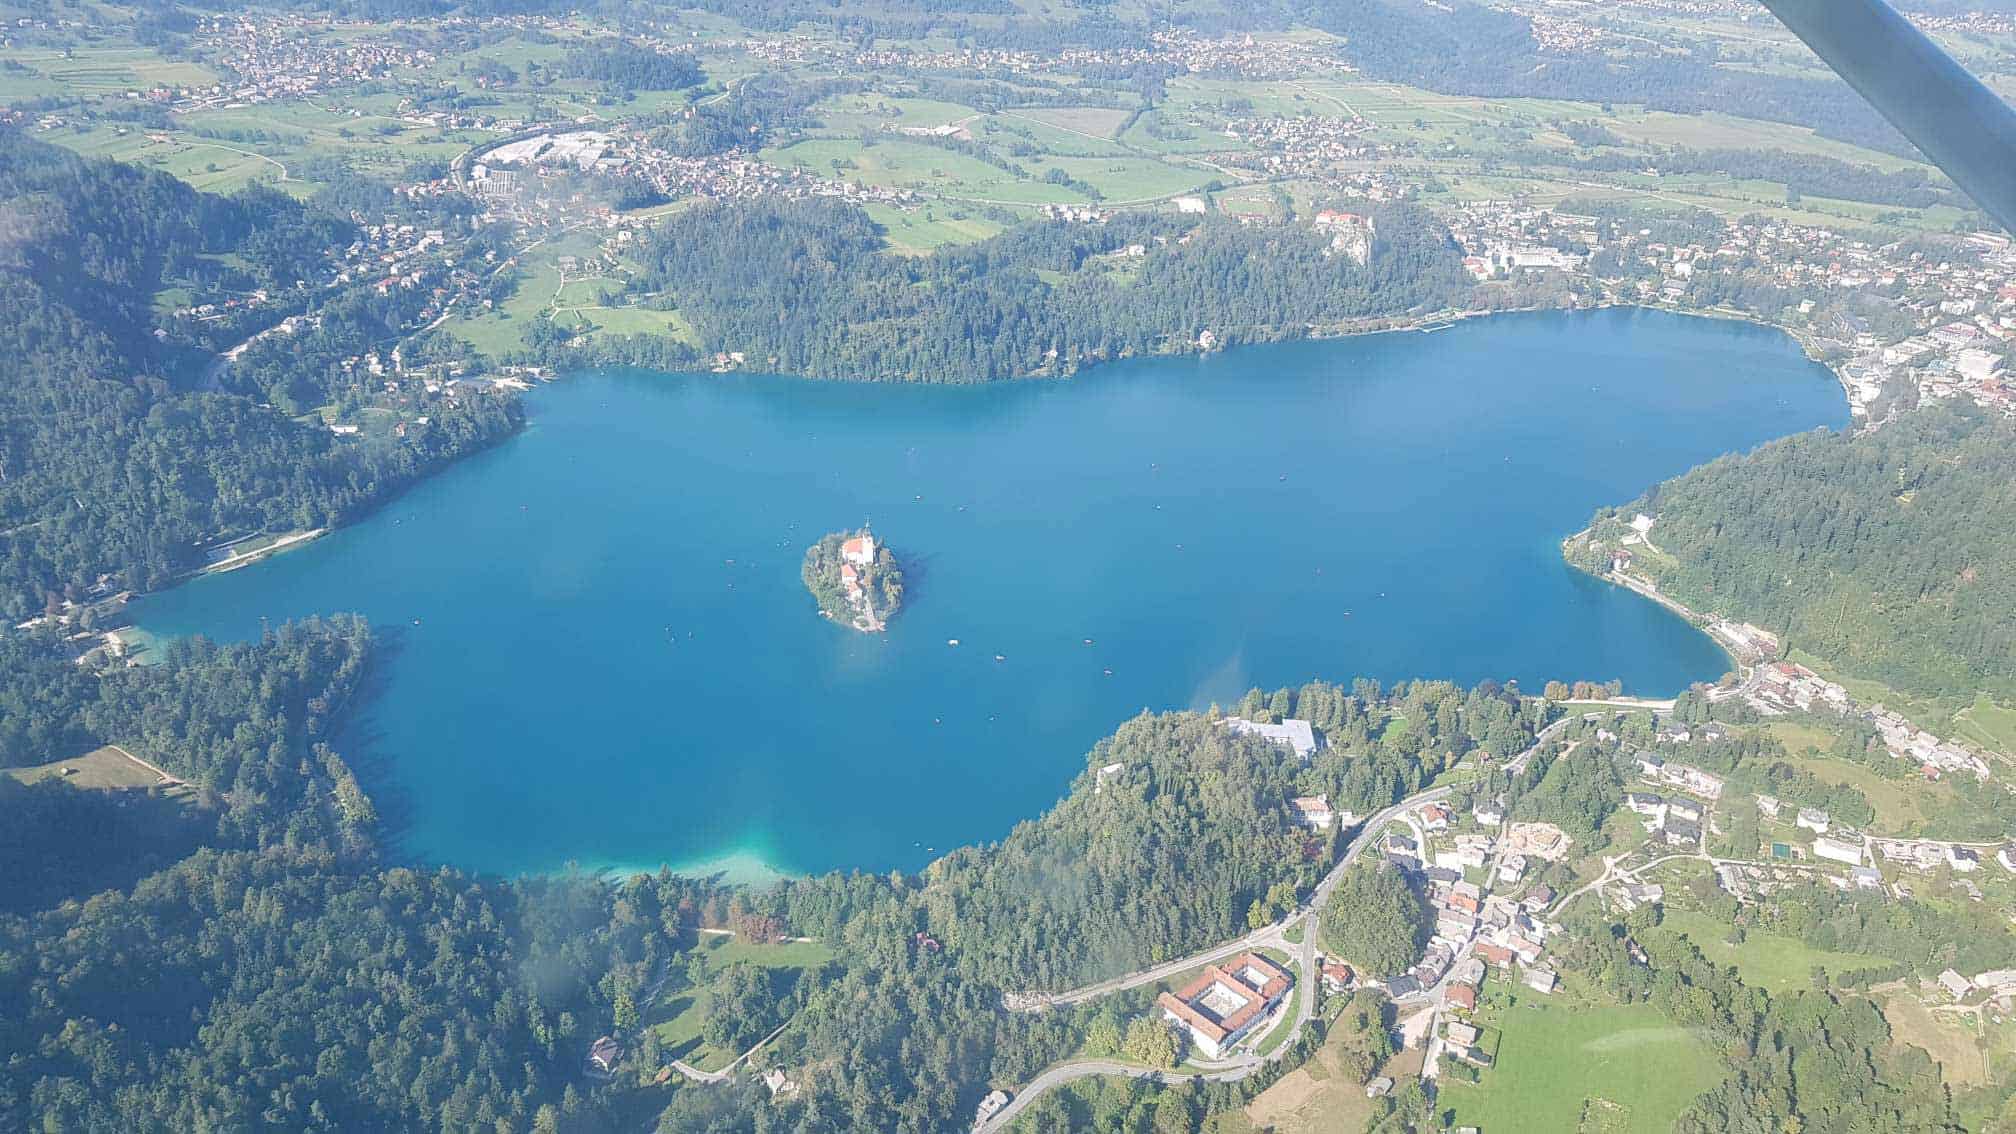 Lake Bled is even more stunning seen from above